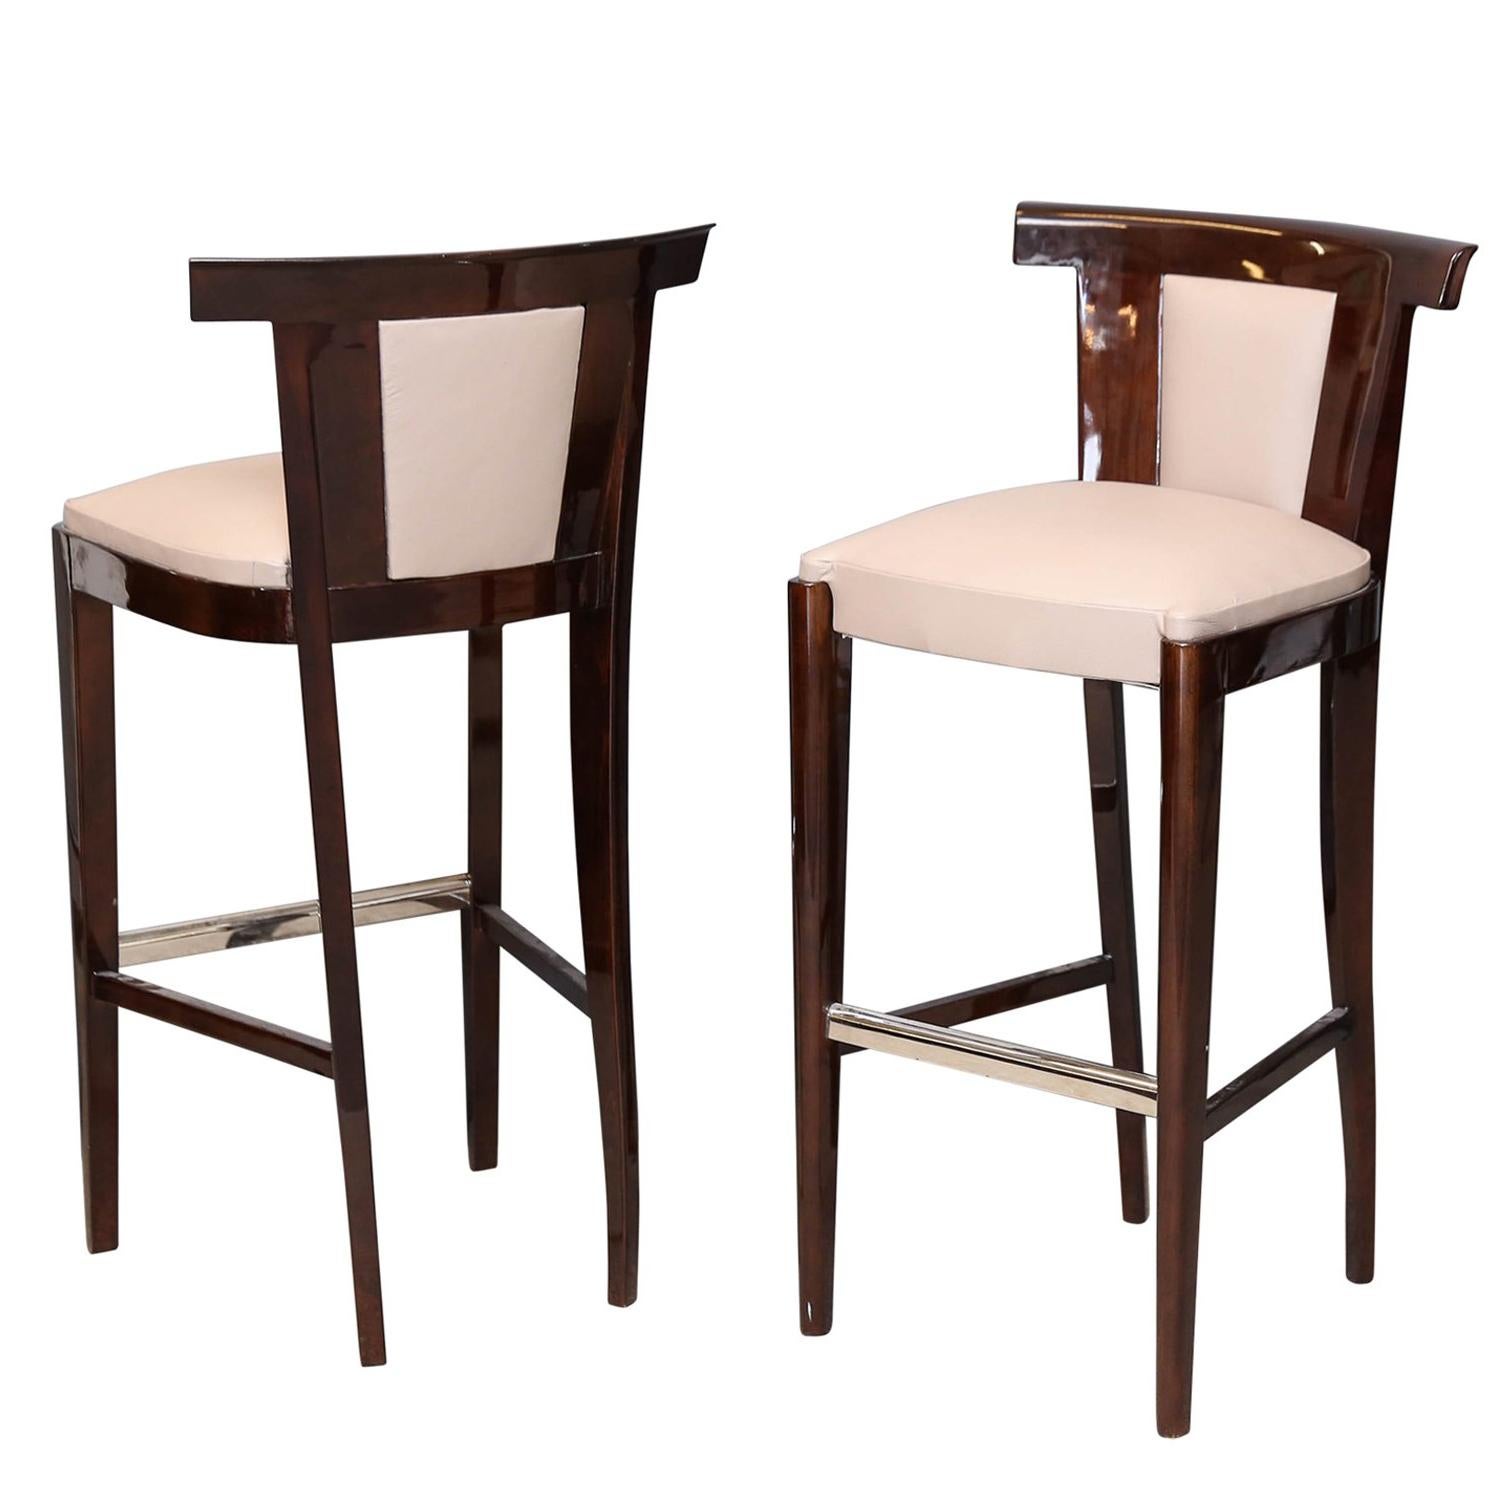 Two Midcentury French Bar Stools in Walnut